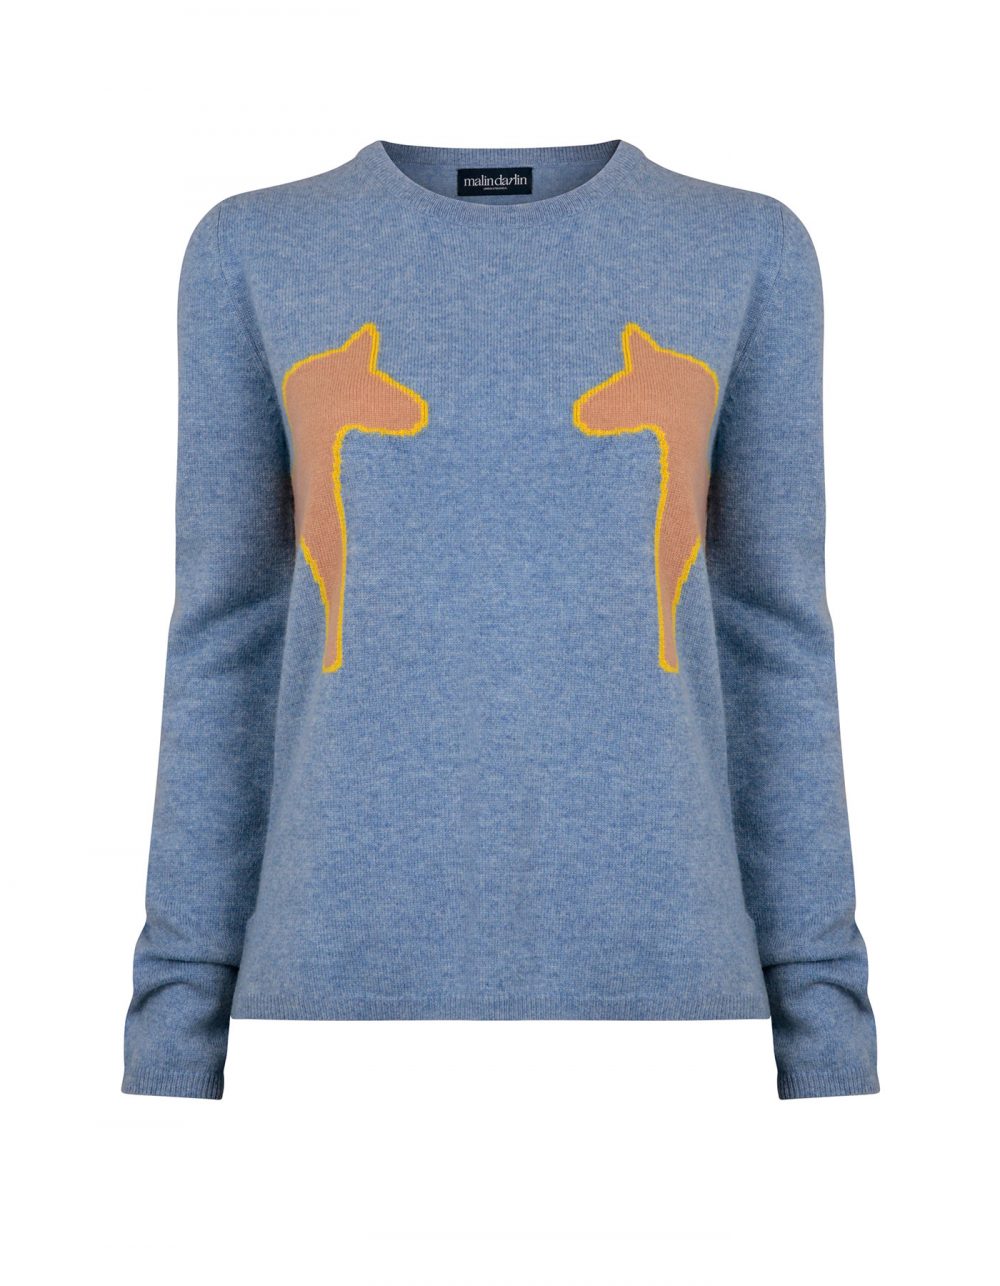 Image showing 2 pony blue cashmere jumpers, part of the malin darlin luxury cashmere, on a white background.